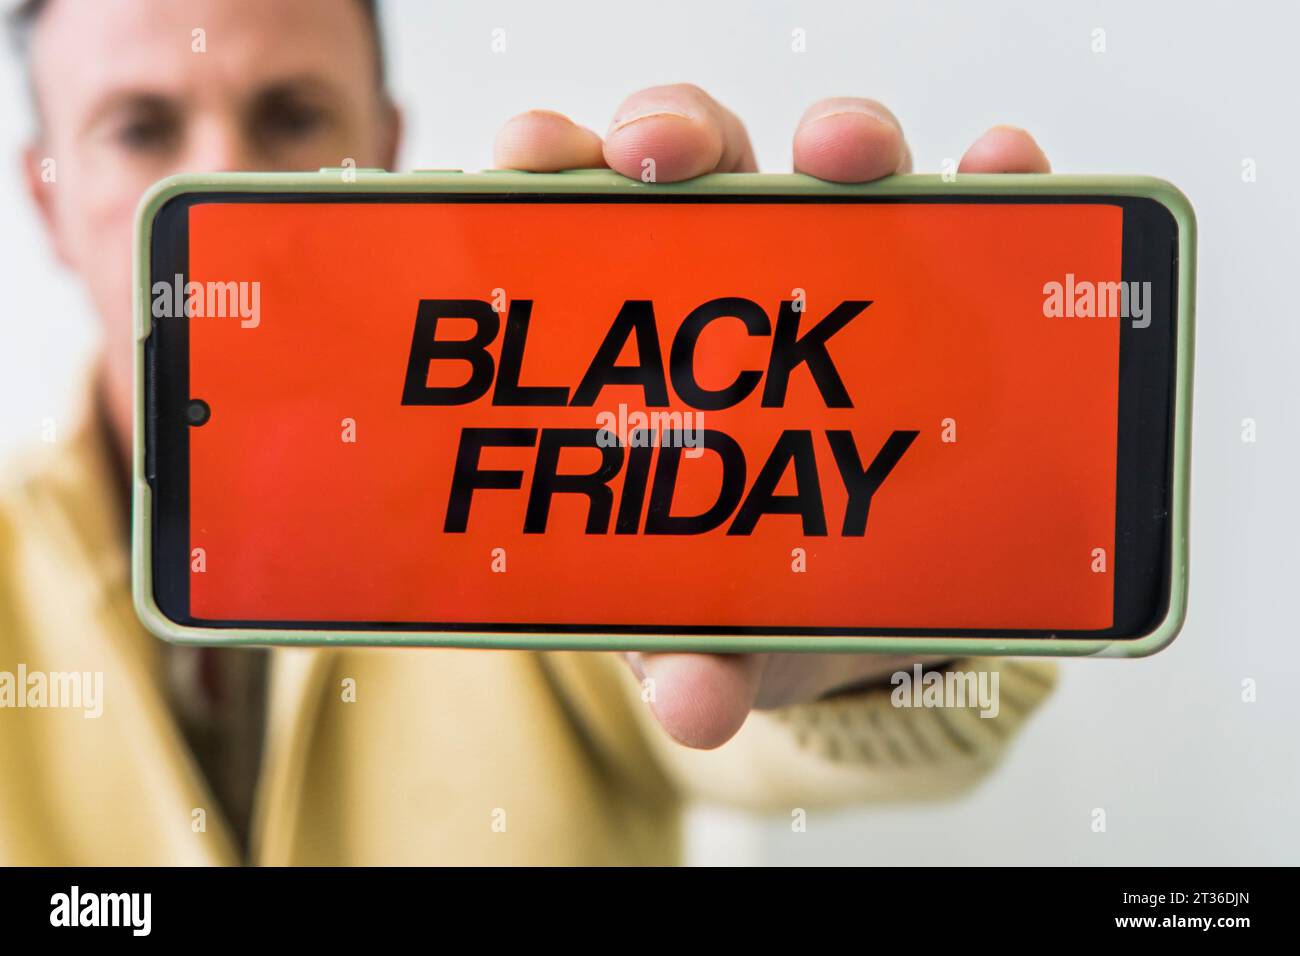 A man holding mobile phone with Black Friday advertisement on the screen. Stock Photo